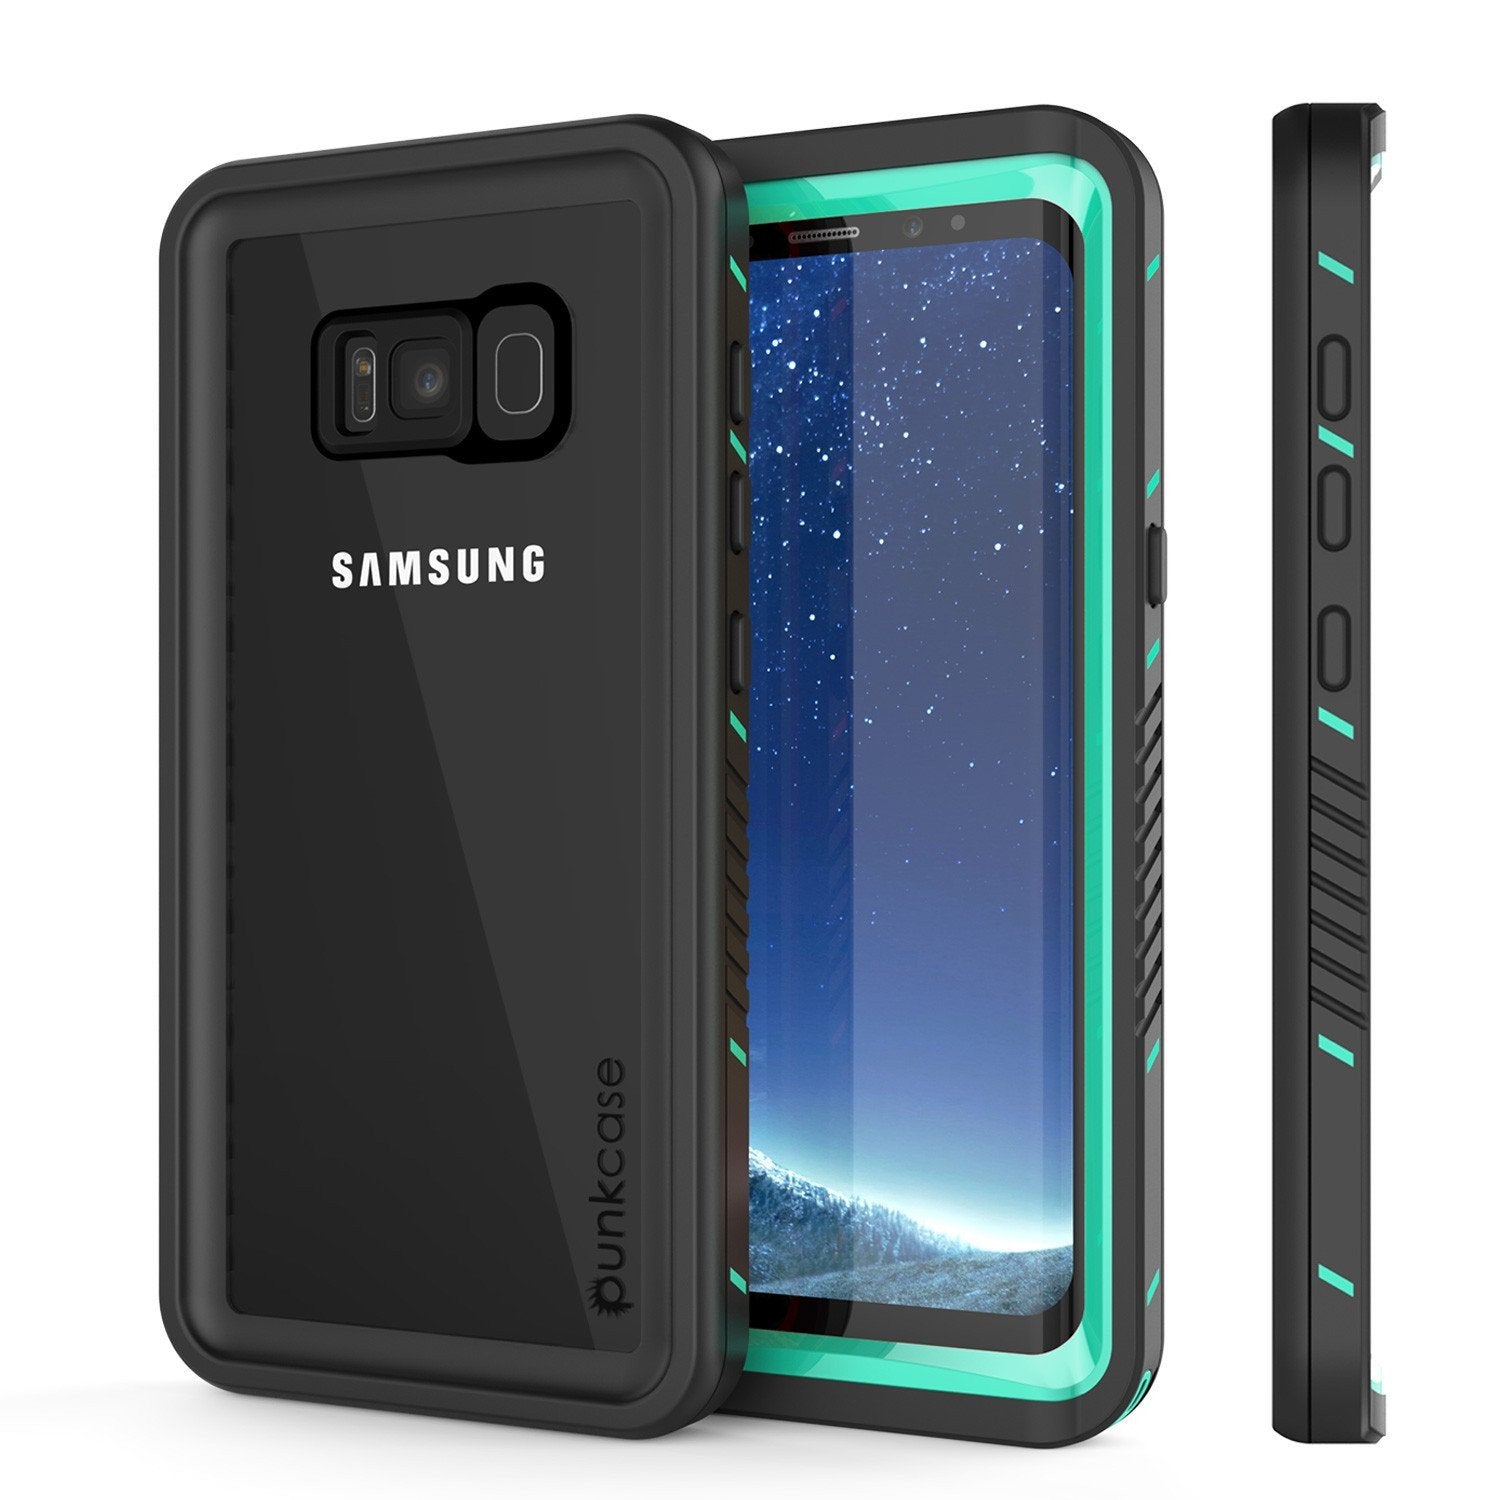 Galaxy S8 PLUS Waterproof Case, Punkcase [Extreme Series] [Slim Fit] [IP68 Certified] [Shockproof] [Snowproof] [Dirproof] Armor Cover W/ Built In Screen Protector for Samsung Galaxy S8+ [Teal]